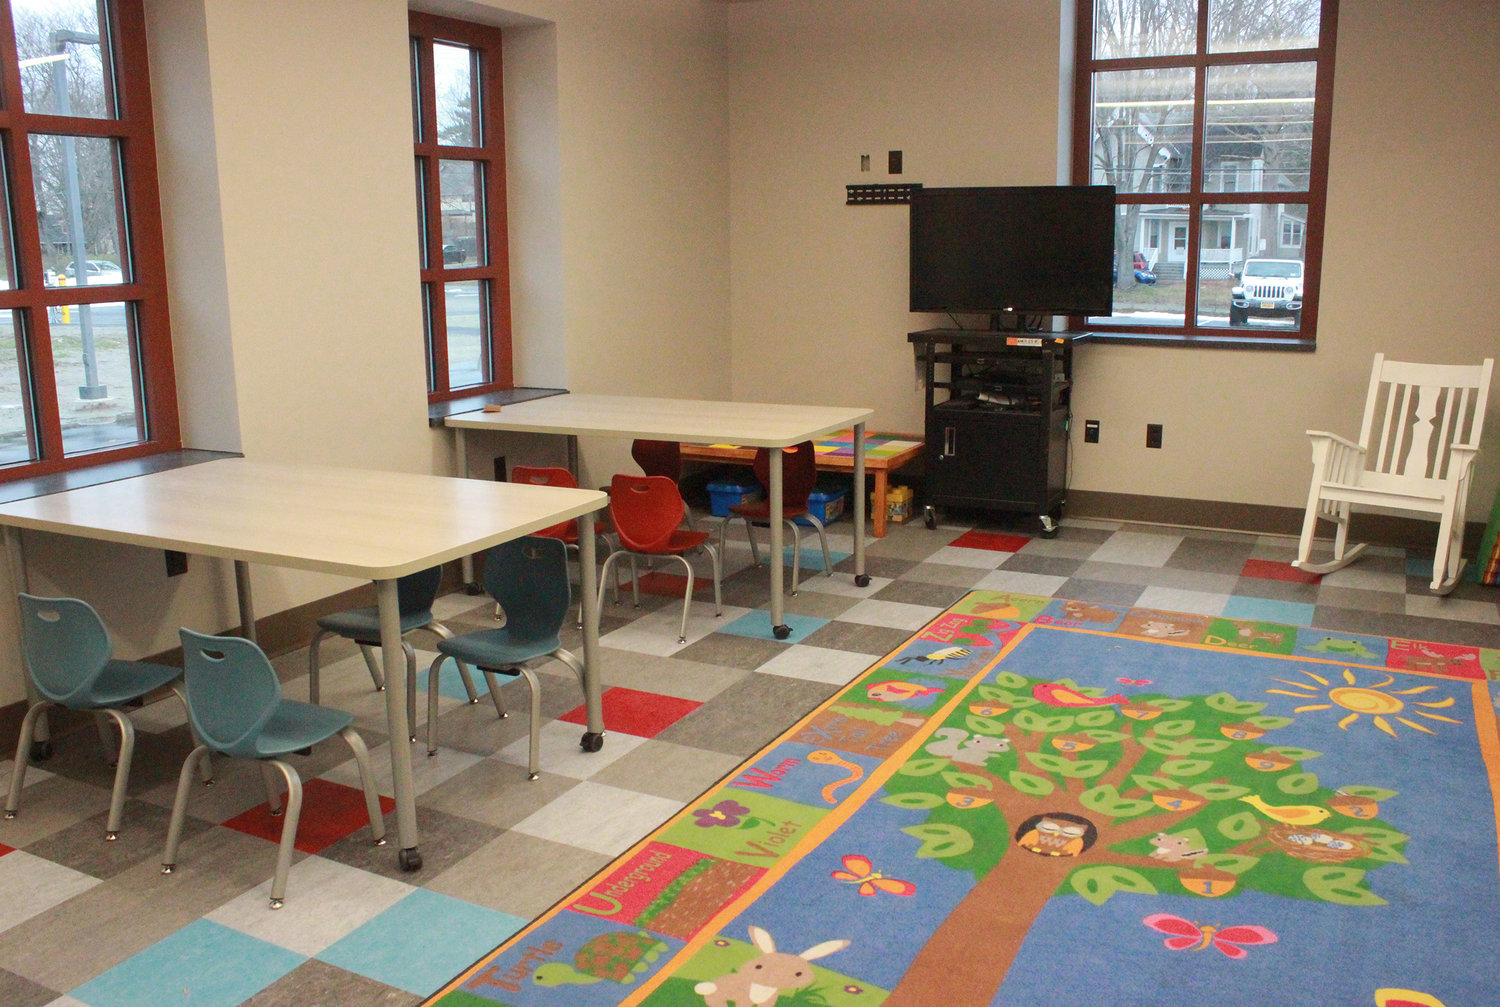 CHILDREN’S ROOM — The new children’s room at the Oneida Public Library’s finished facility sits ready for activities and story time.